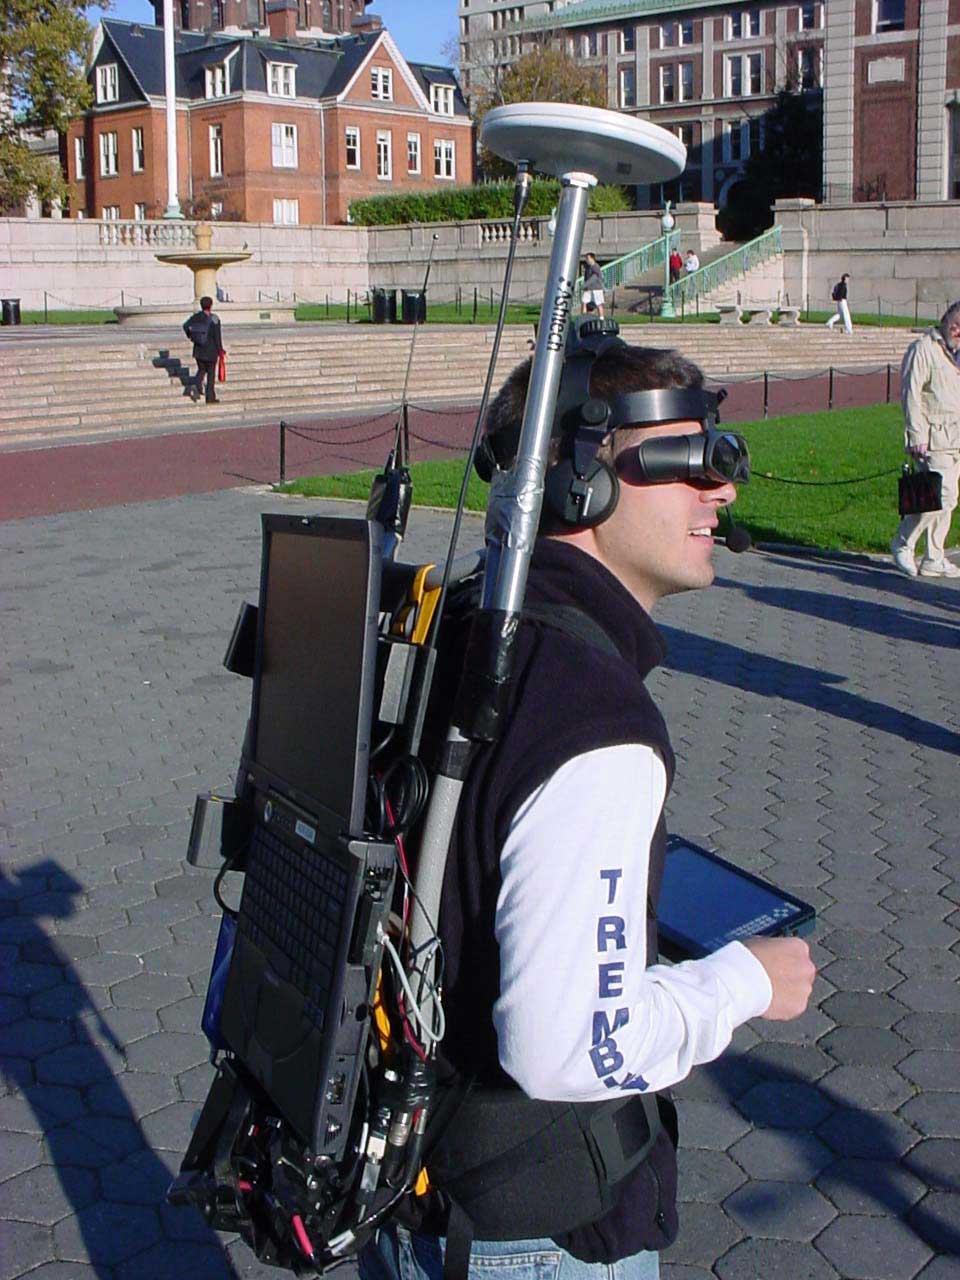 Mobile outdoor AR Backpack systems User wears/carries: Computer HMD Inertial